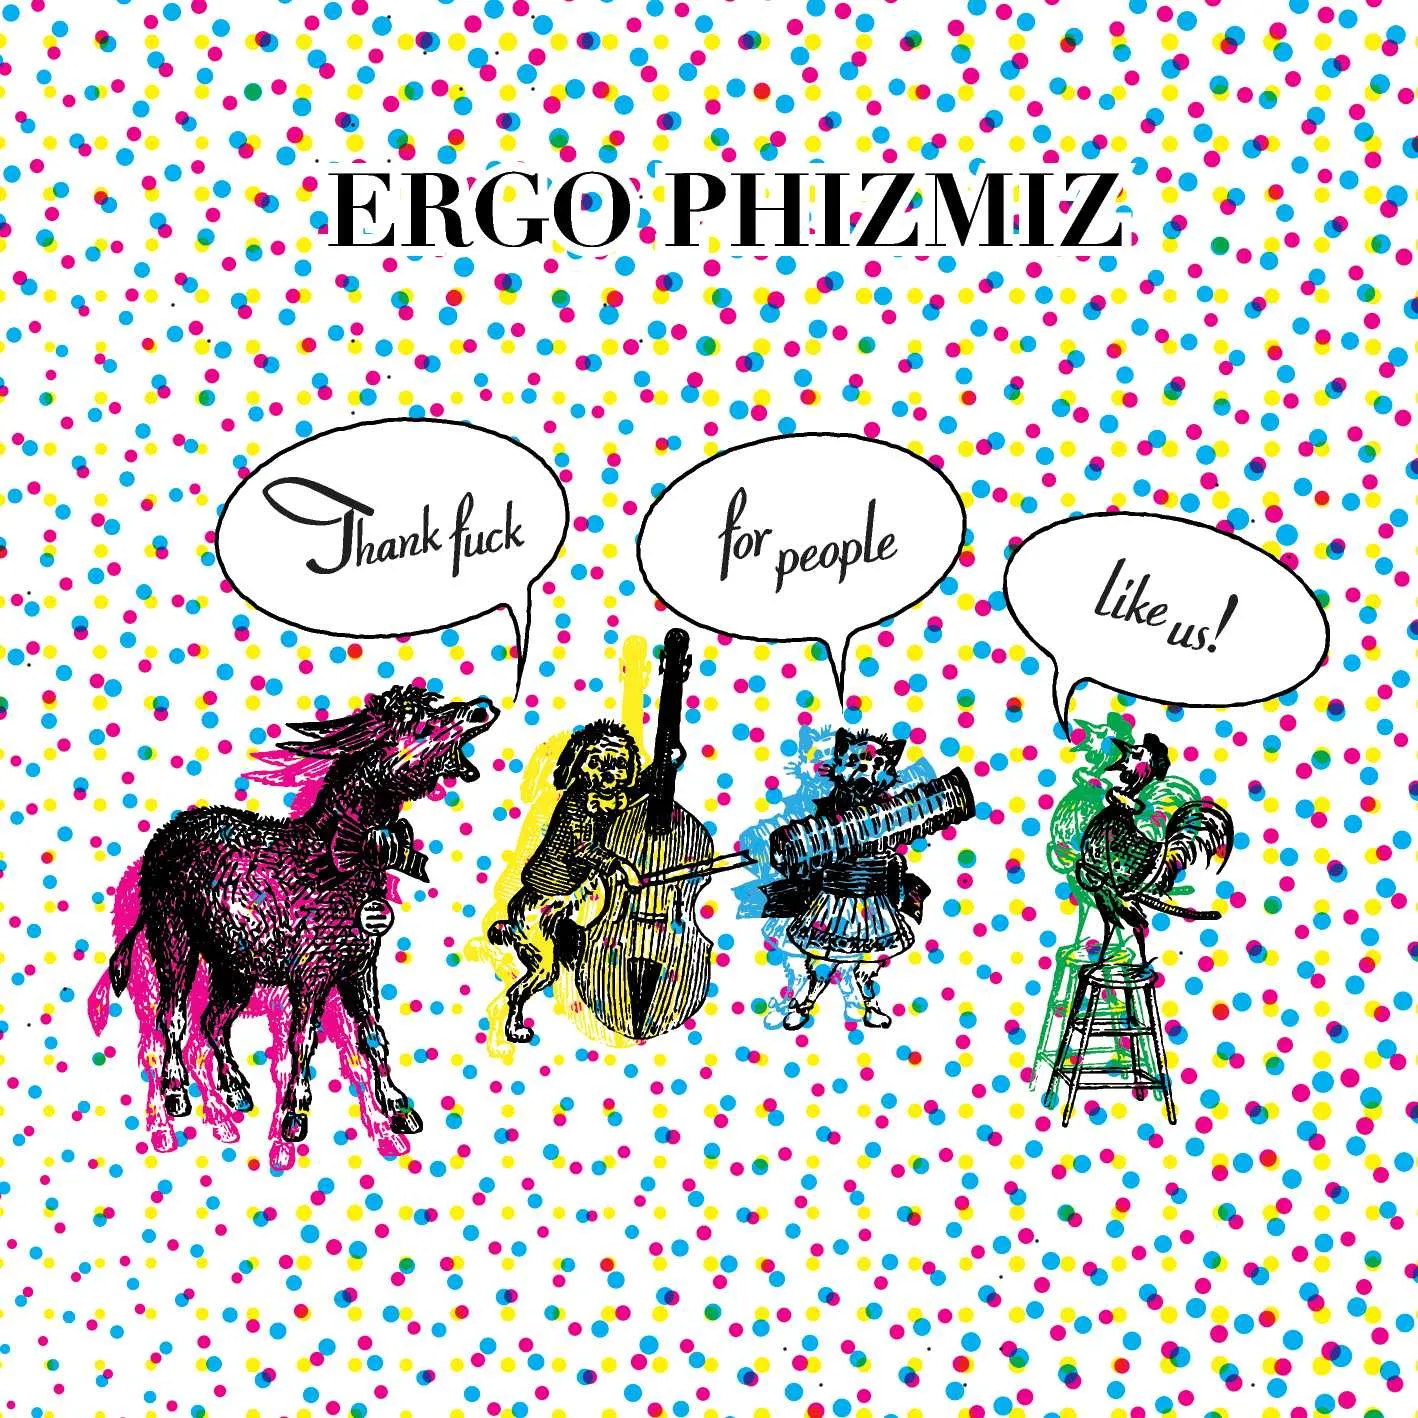 Album cover for “Thank Fuck For People Like Us” by Ergo Phizmiz